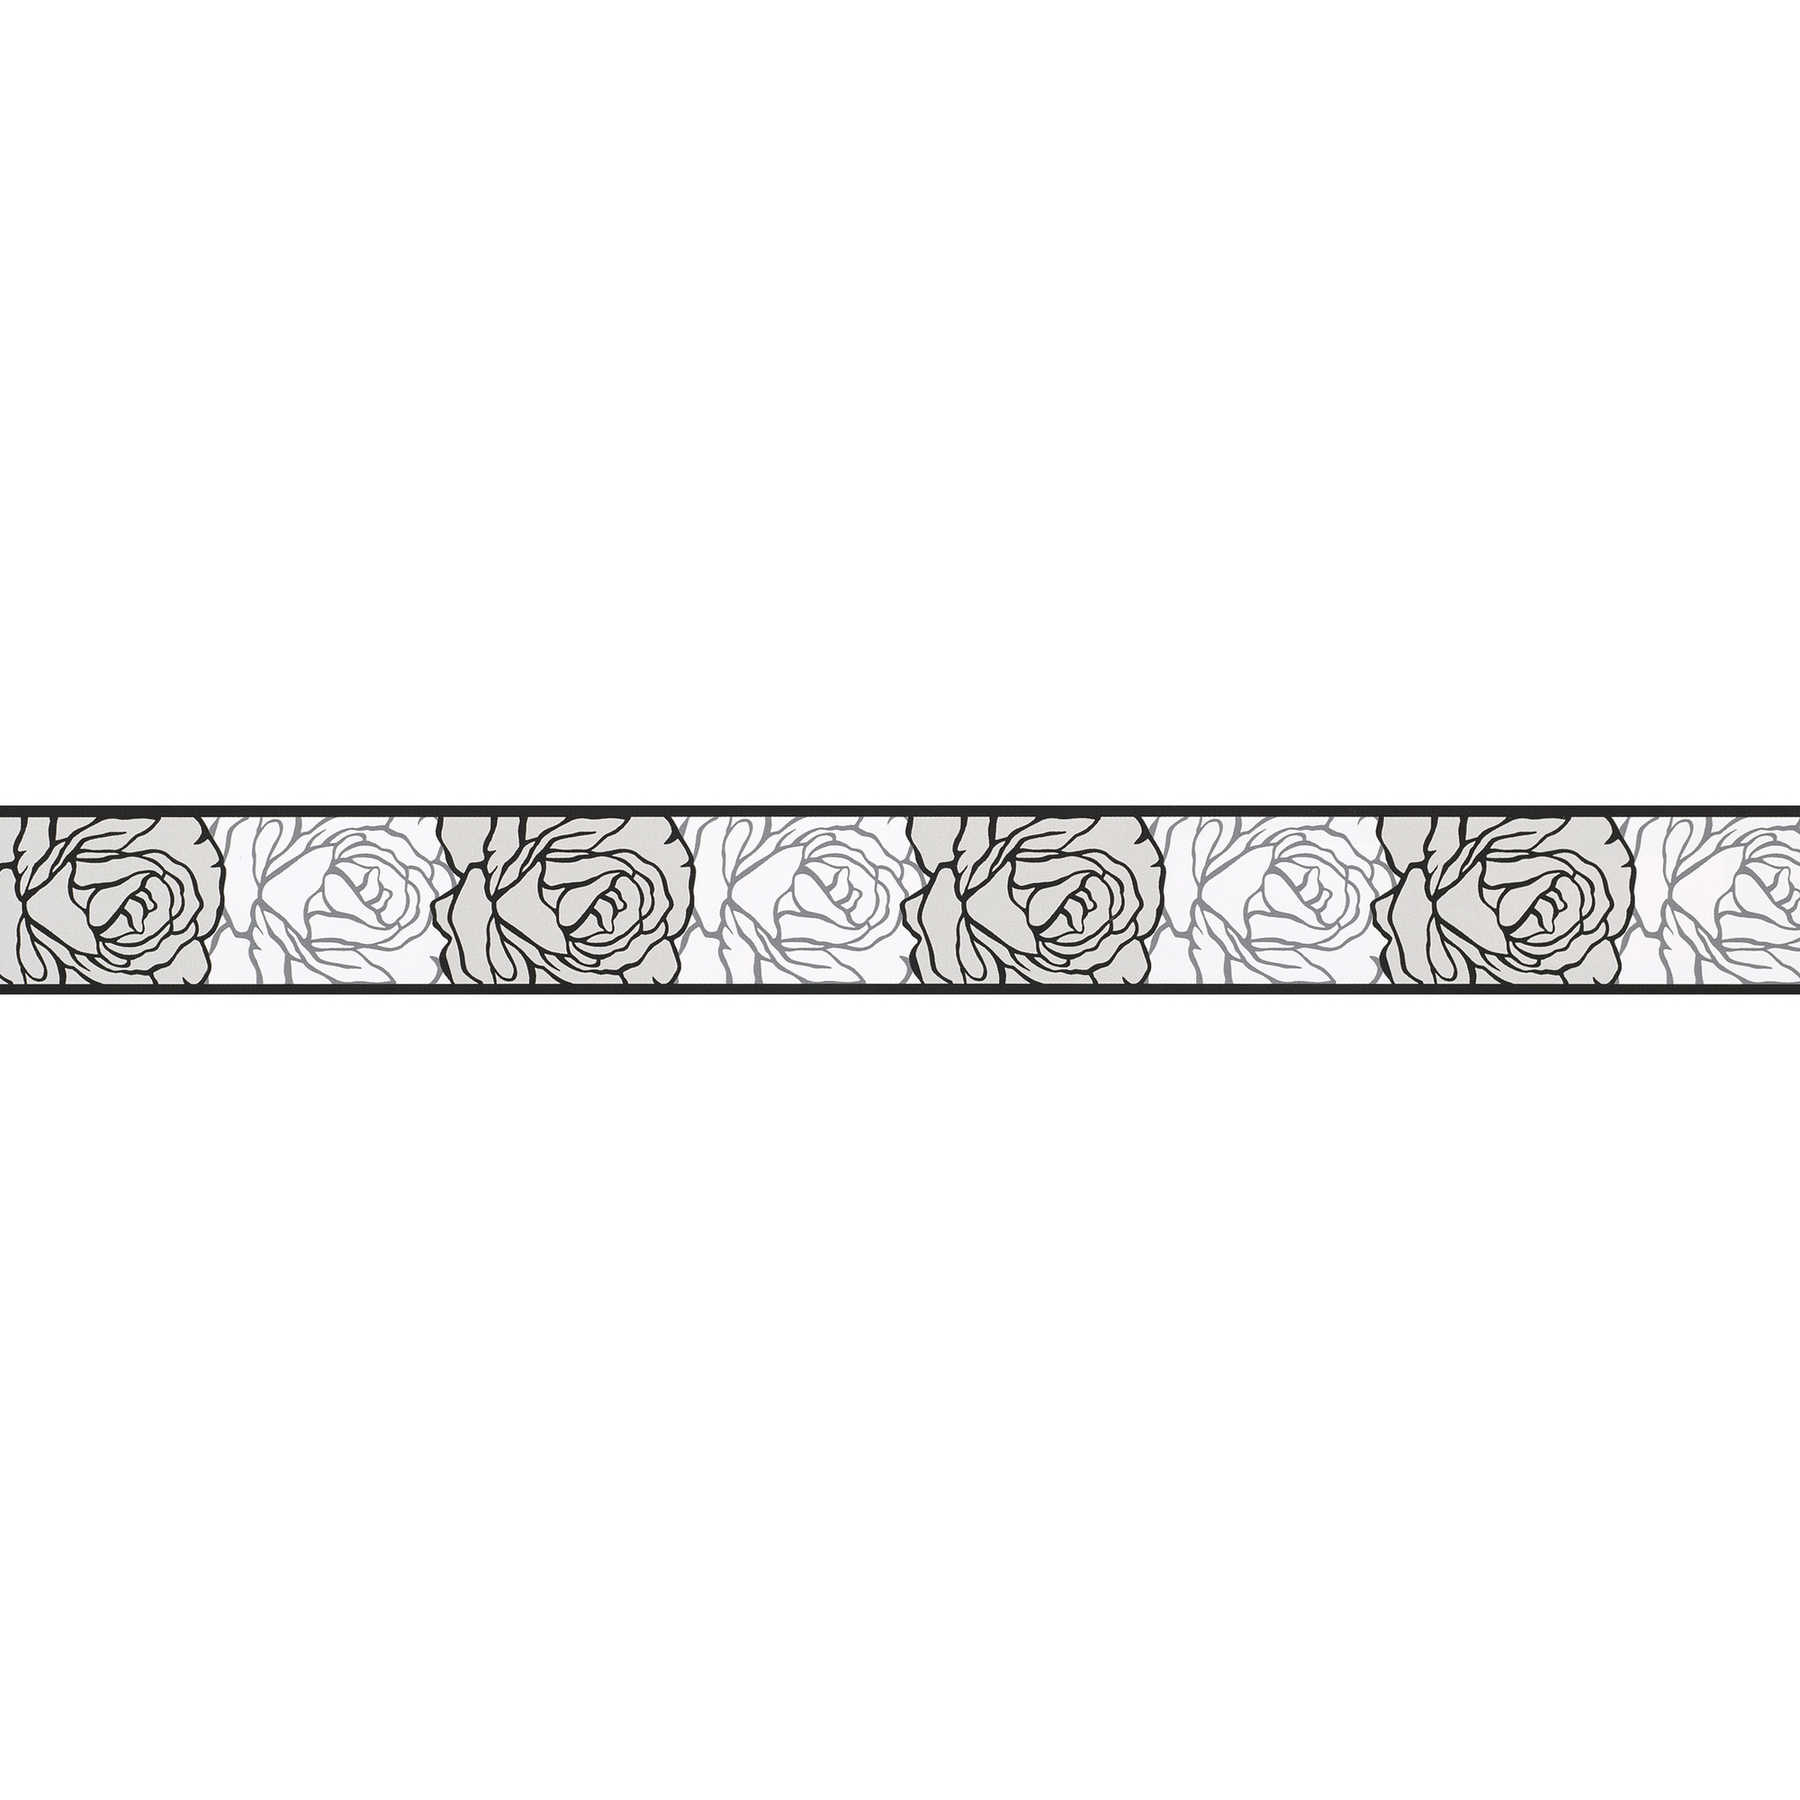         Wallpaper border roses in black and white look
    